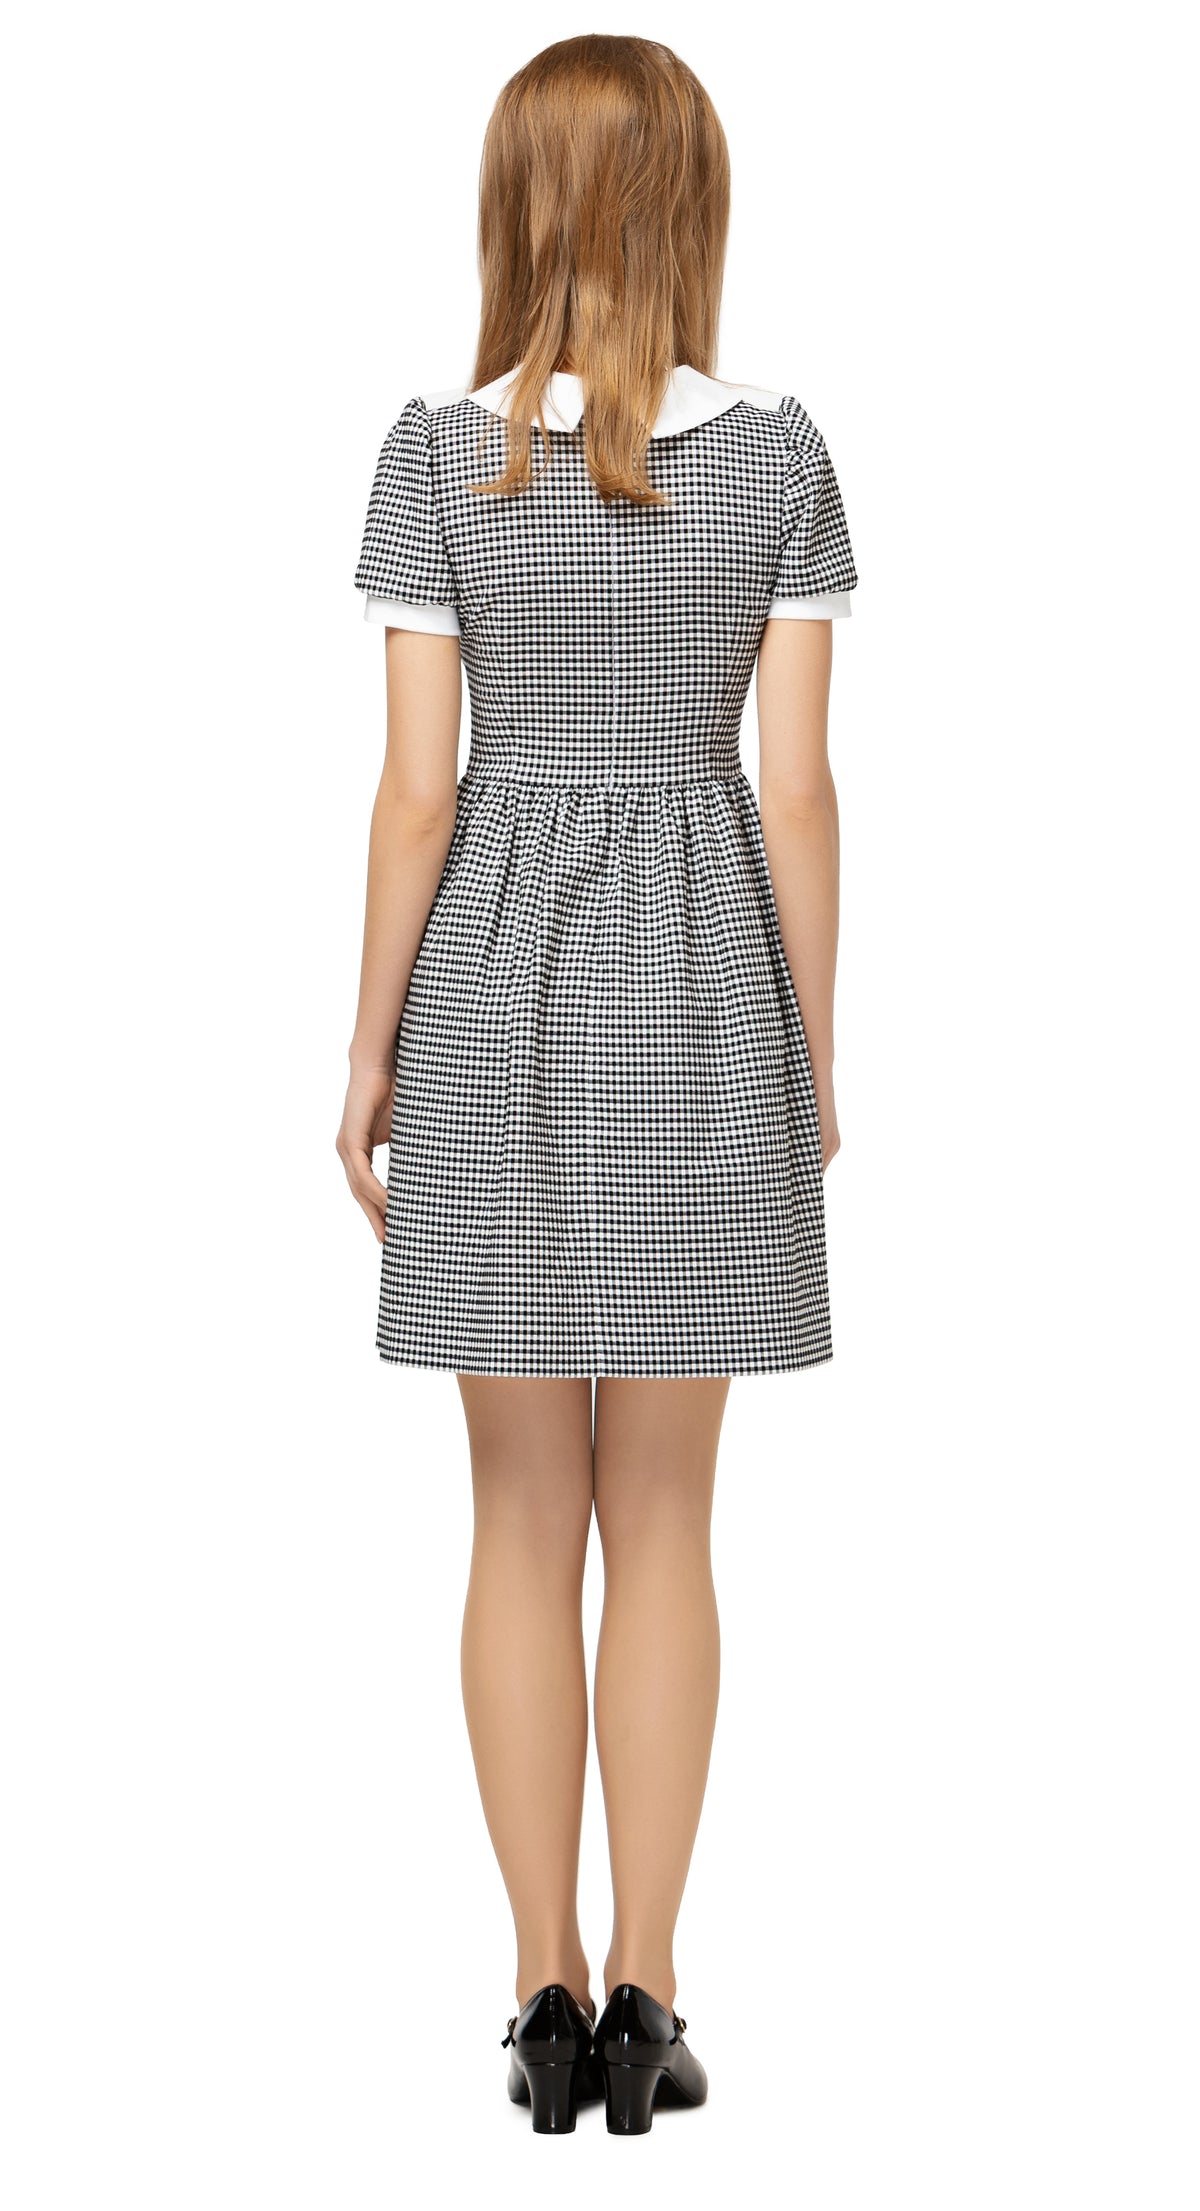 Gingham Spring dress with fitted bodice and gathered skirt. Made of premium quality Italian cotton, with slightly puffed sleeves, four button detailing and classic collar. A casual, effortlessly  comfortable and cool fair weather go-to.